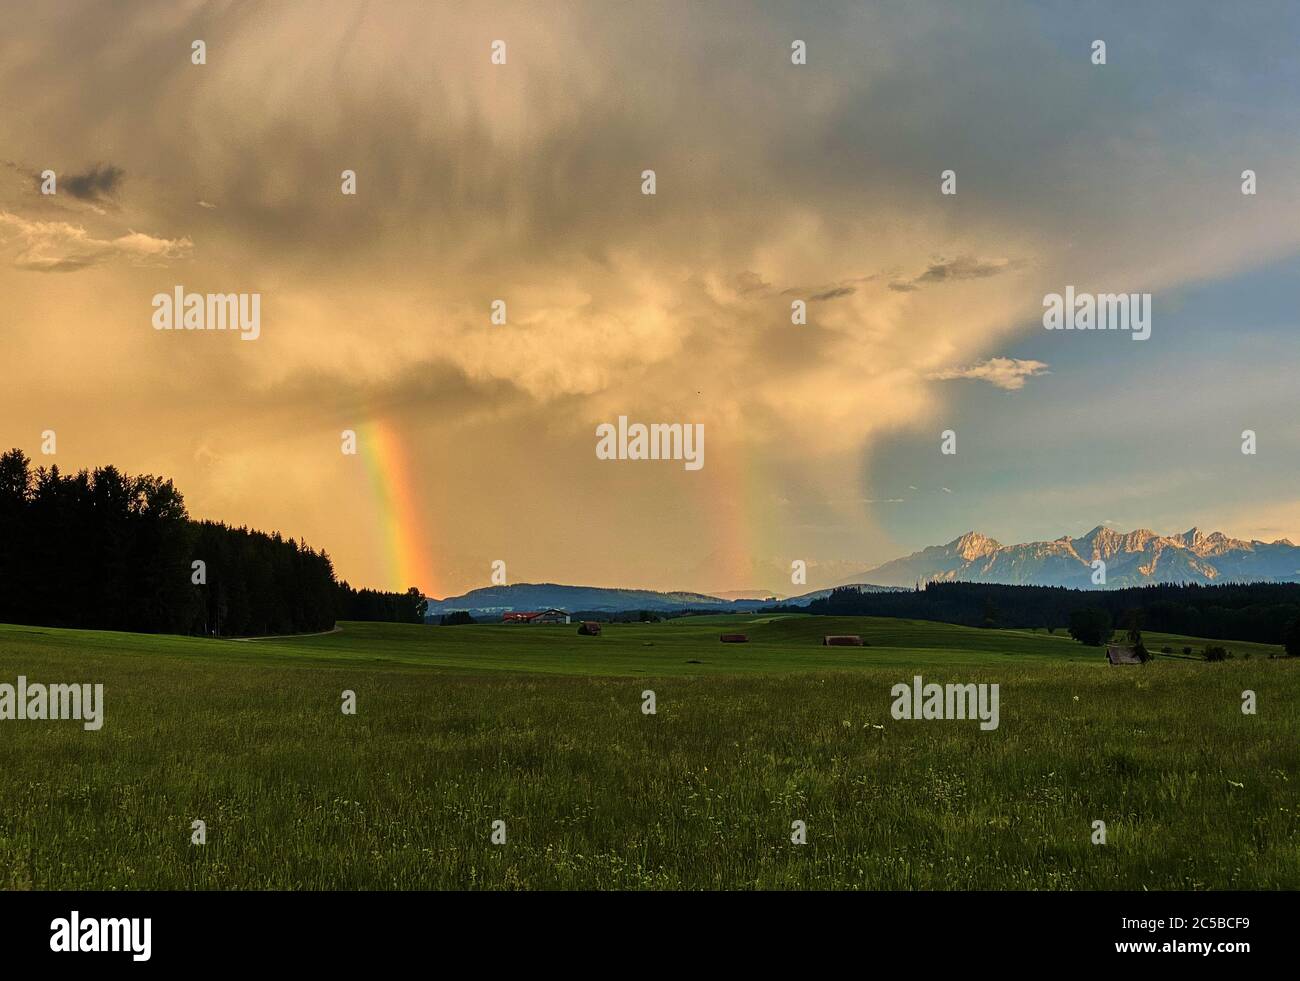 Marktoberdorf, Germany, July 01, 2020.  Stormy weather with heavy rain changes with sunset and rainbow. © Peter Schatz / Alamy Stock Photos Stock Photo